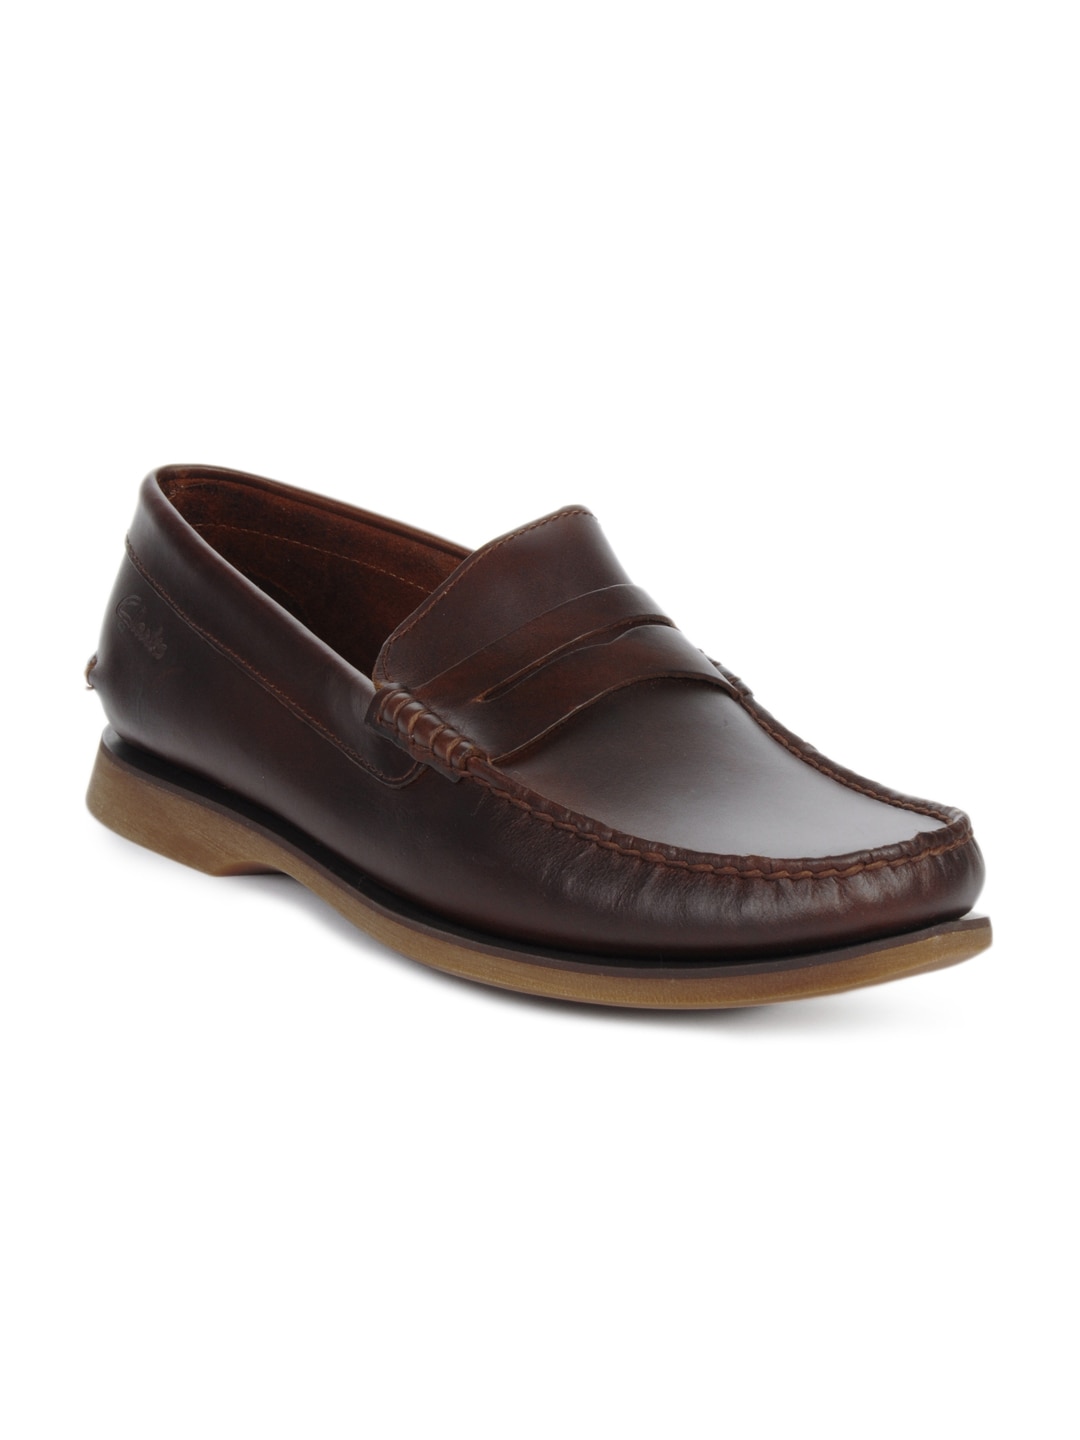 Clarks Men Brown Quay Point Mahogany Leather Shoes